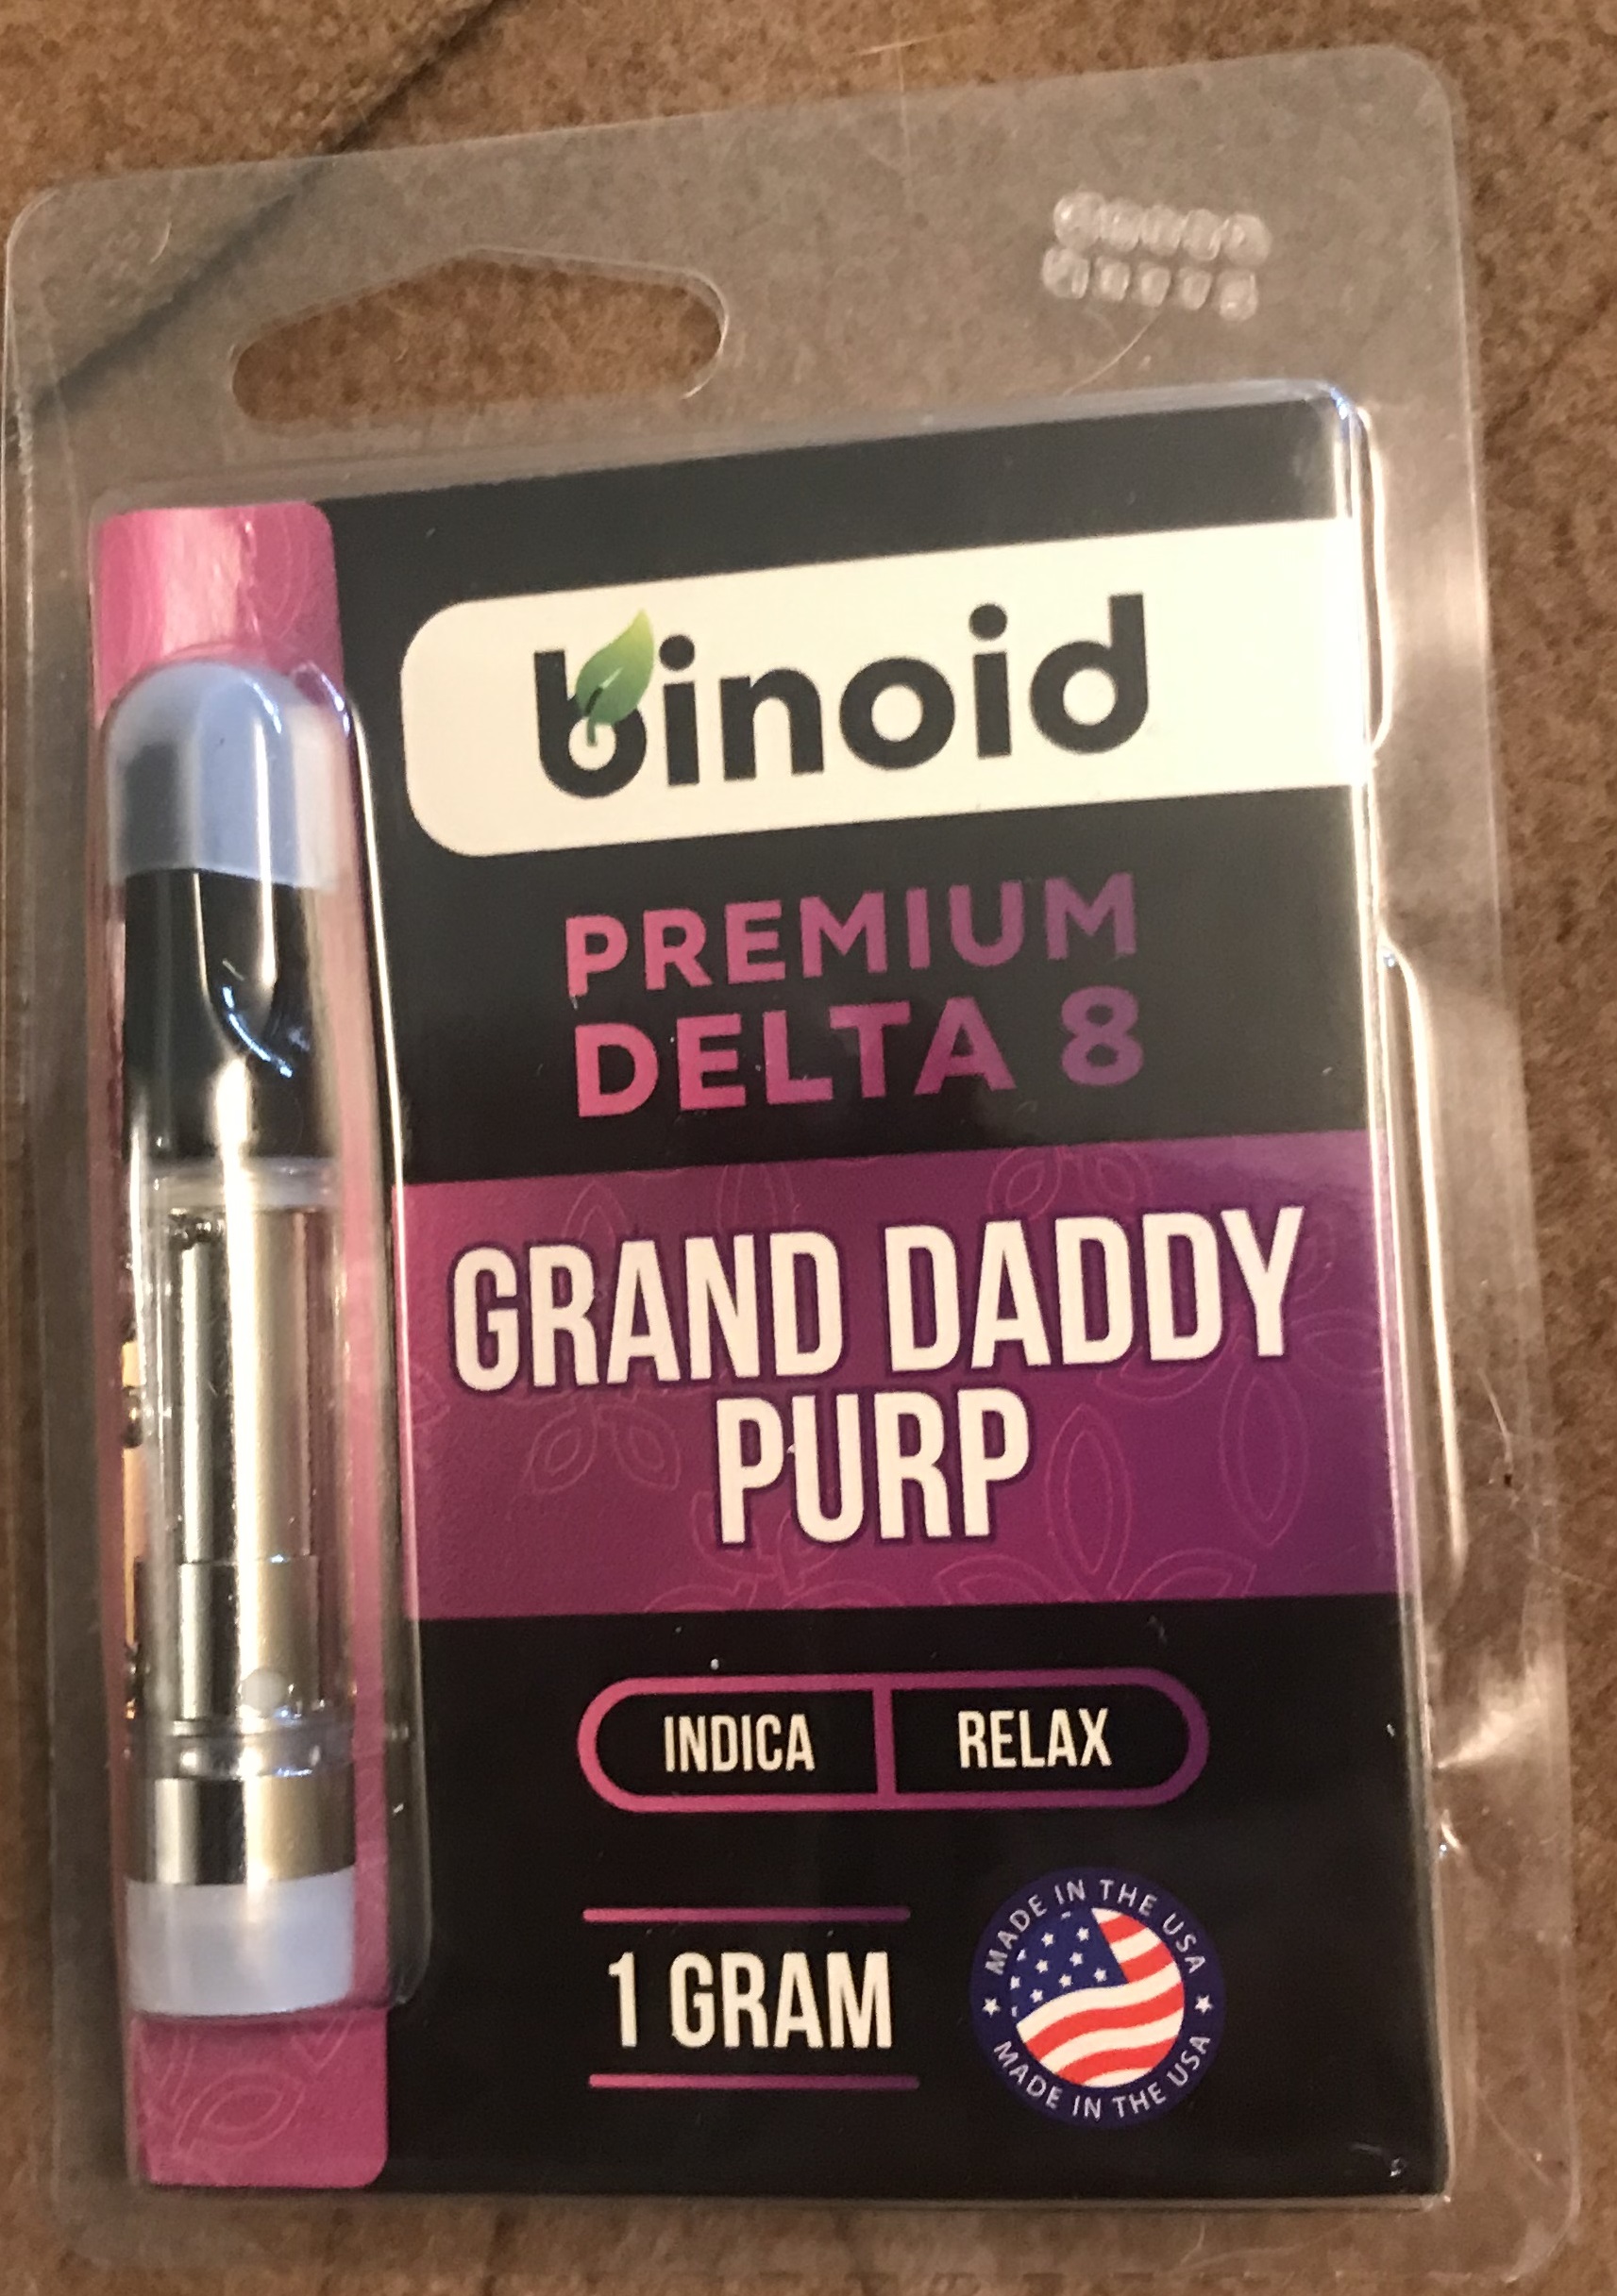 Delta 8 Sprayed Flower - Products|Thc|Hemp|Brand|Gummies|Product|Delta-8|Cbd|Origin|Cannabis|Delta|Users|Effects|Cartridges|Brands|Range|List|Research|Usasource|Options|Benefits|Plant|Companies|Vape|Source|Results|Gummy|People|Space|High-Quality|Quality|Place|Overview|Flowers|Lab|Drug|Cannabinoids|Tinctures|Overviewproducts|Cartridge|Delta-8 Thc|Delta-8 Products|Delta-9 Thc|Delta-8 Brands|Usa Source|Delta-8 Thc Products|Cannabis Plant|Federal Level|United States|Delta-8 Gummies|Delta-8 Space|Health Canada|Delta Products|Delta-8 Thc Gummies|Delta-8 Companies|Vape Cartridges|Similar Benefits|Hemp Doctor|Brand Overviewproducts|Drug Test|High-Quality Products|Organic Hemp|San Jose|Editorial Team|Farm Bill|Overview Products|Wide Range|Psychoactive Properties|Reliable Provider|Boston Hempire